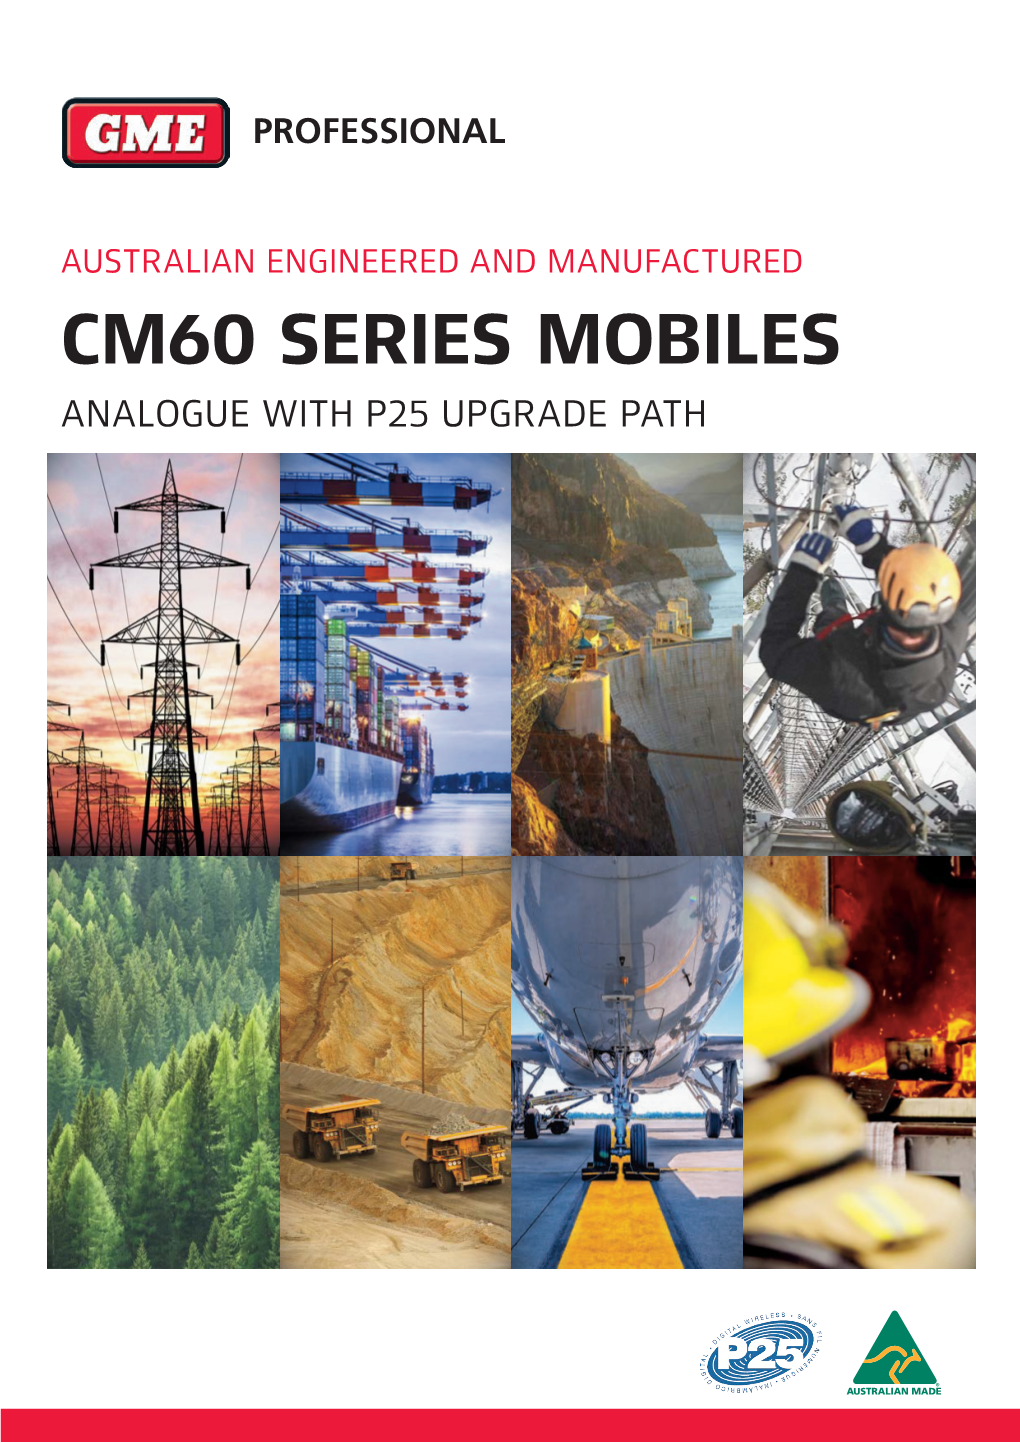 Cm60 Series Mobiles Analogue with P25 Upgrade Path Analogue Radio Configurations